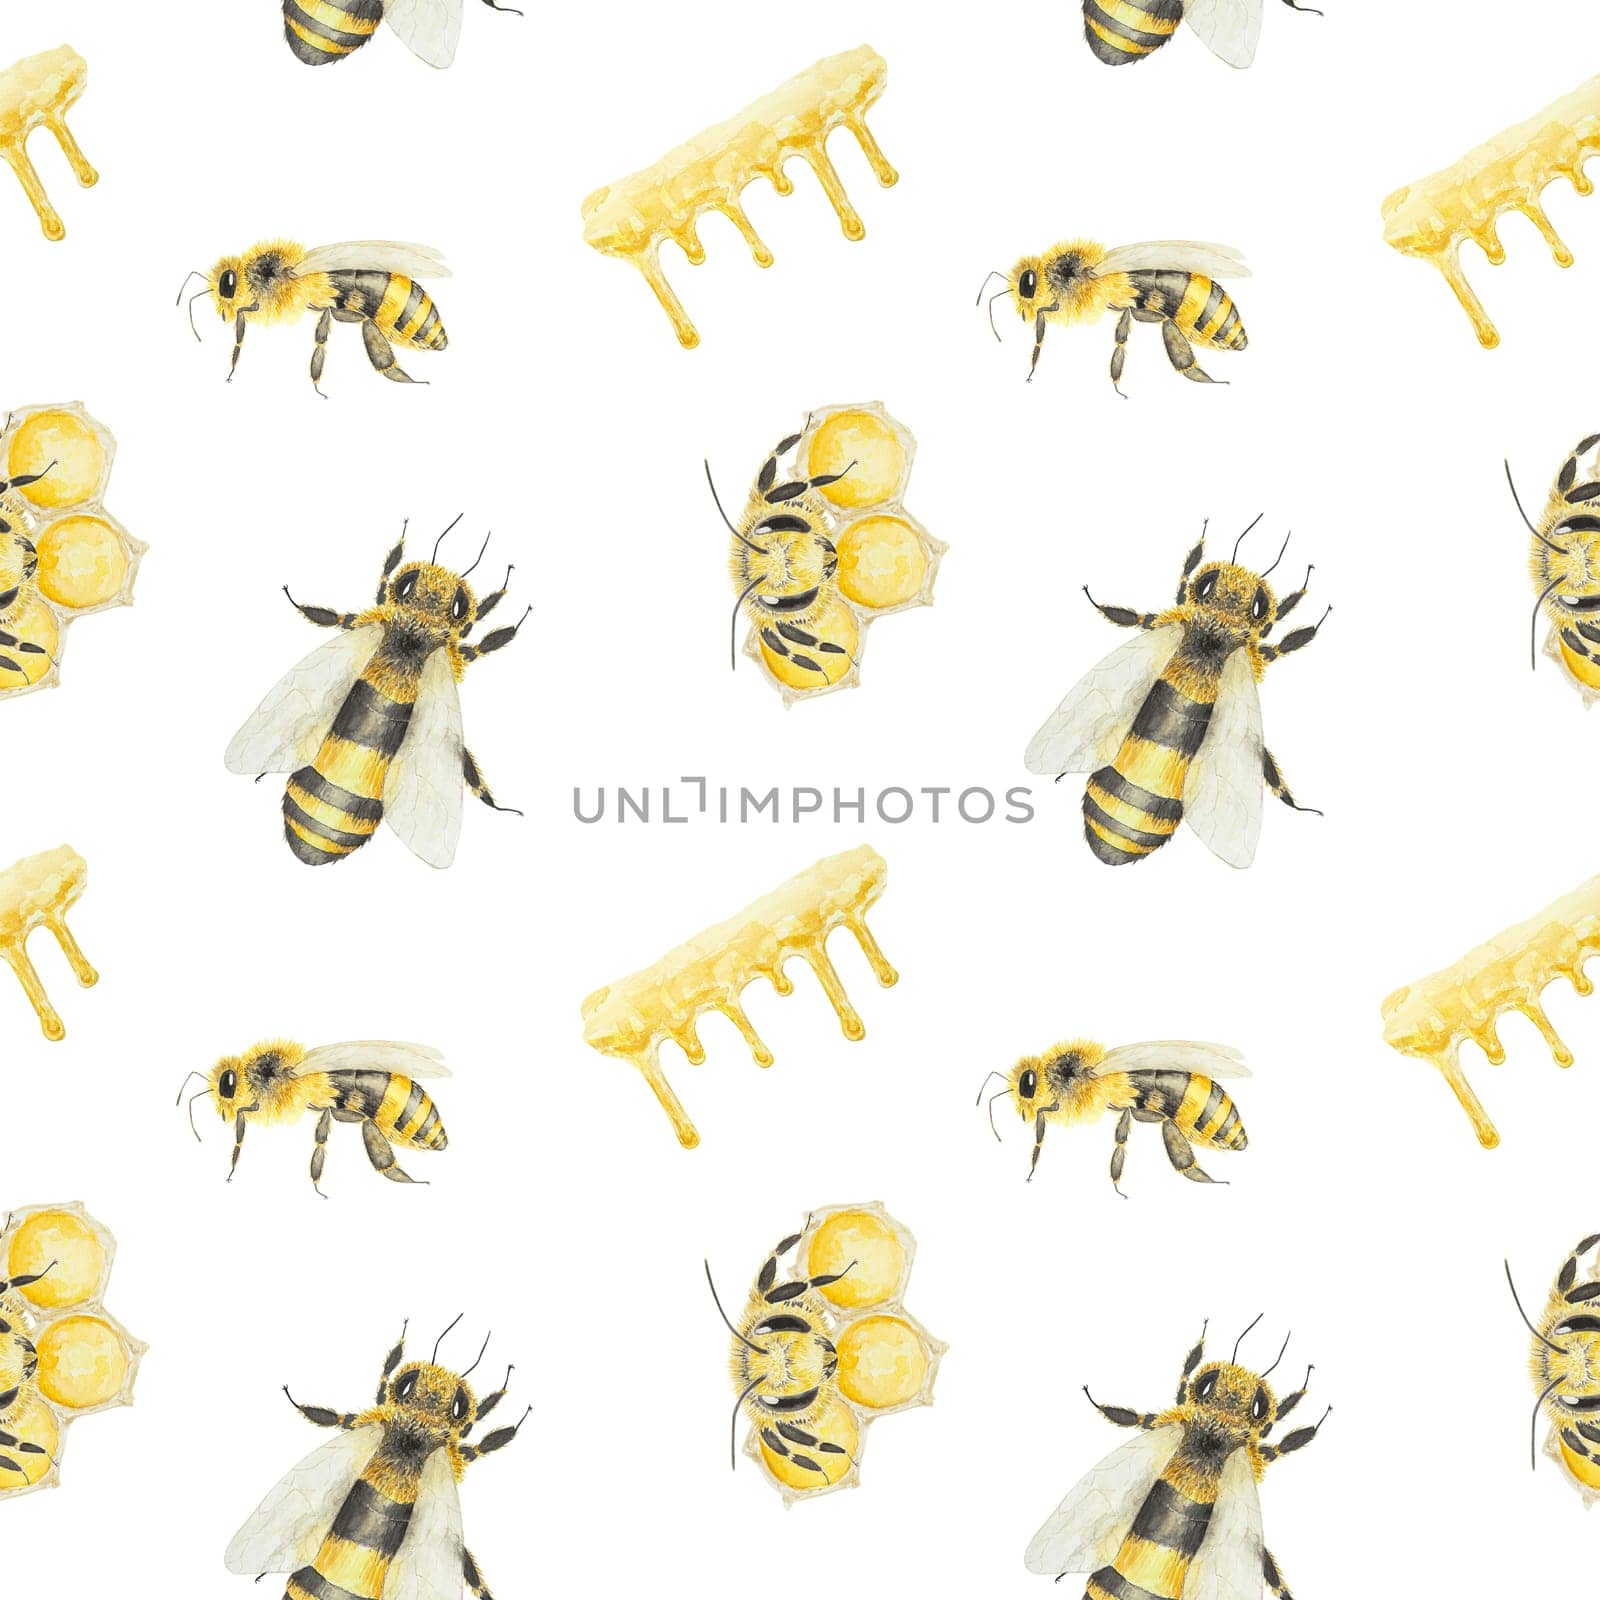 Watercolor pattern of honey and bees. Hand drawn and isolated on white background. Great for printing on fabric, postcards, invitations, menus, cosmetics, cooking books and others.